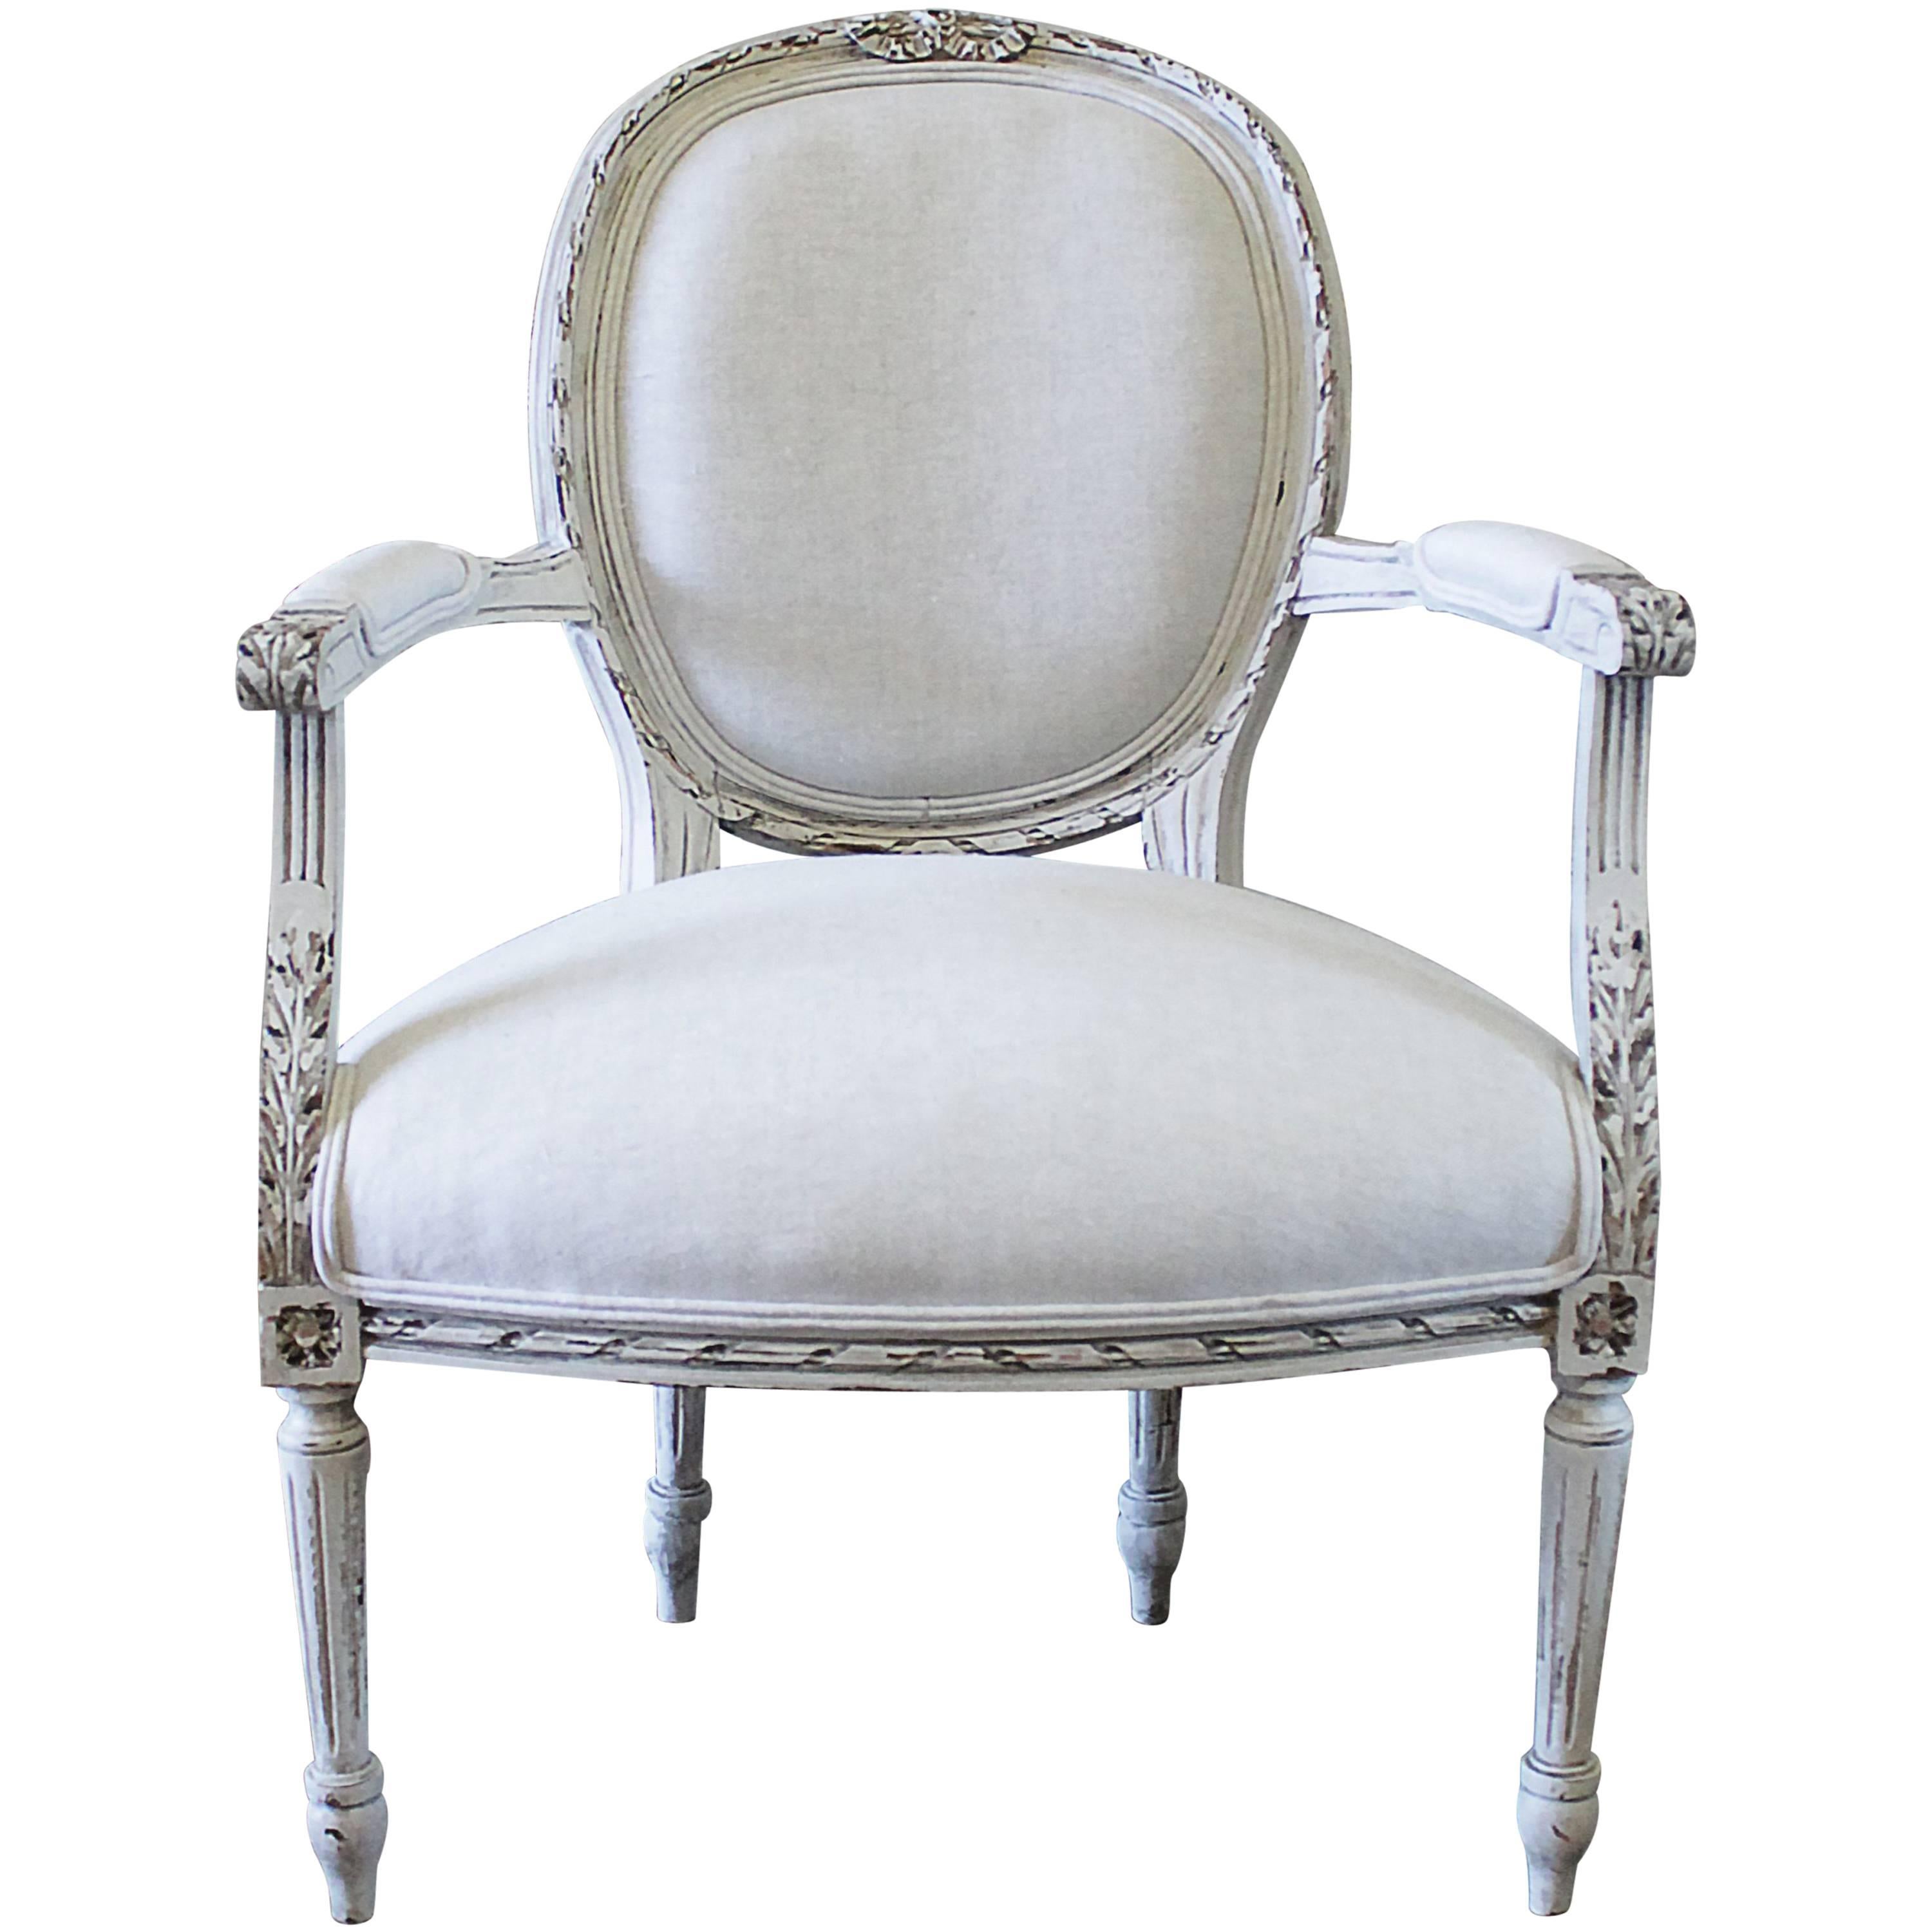 19th Century Carved Louis XVI Style Chair Upholstered in Belgian Linen